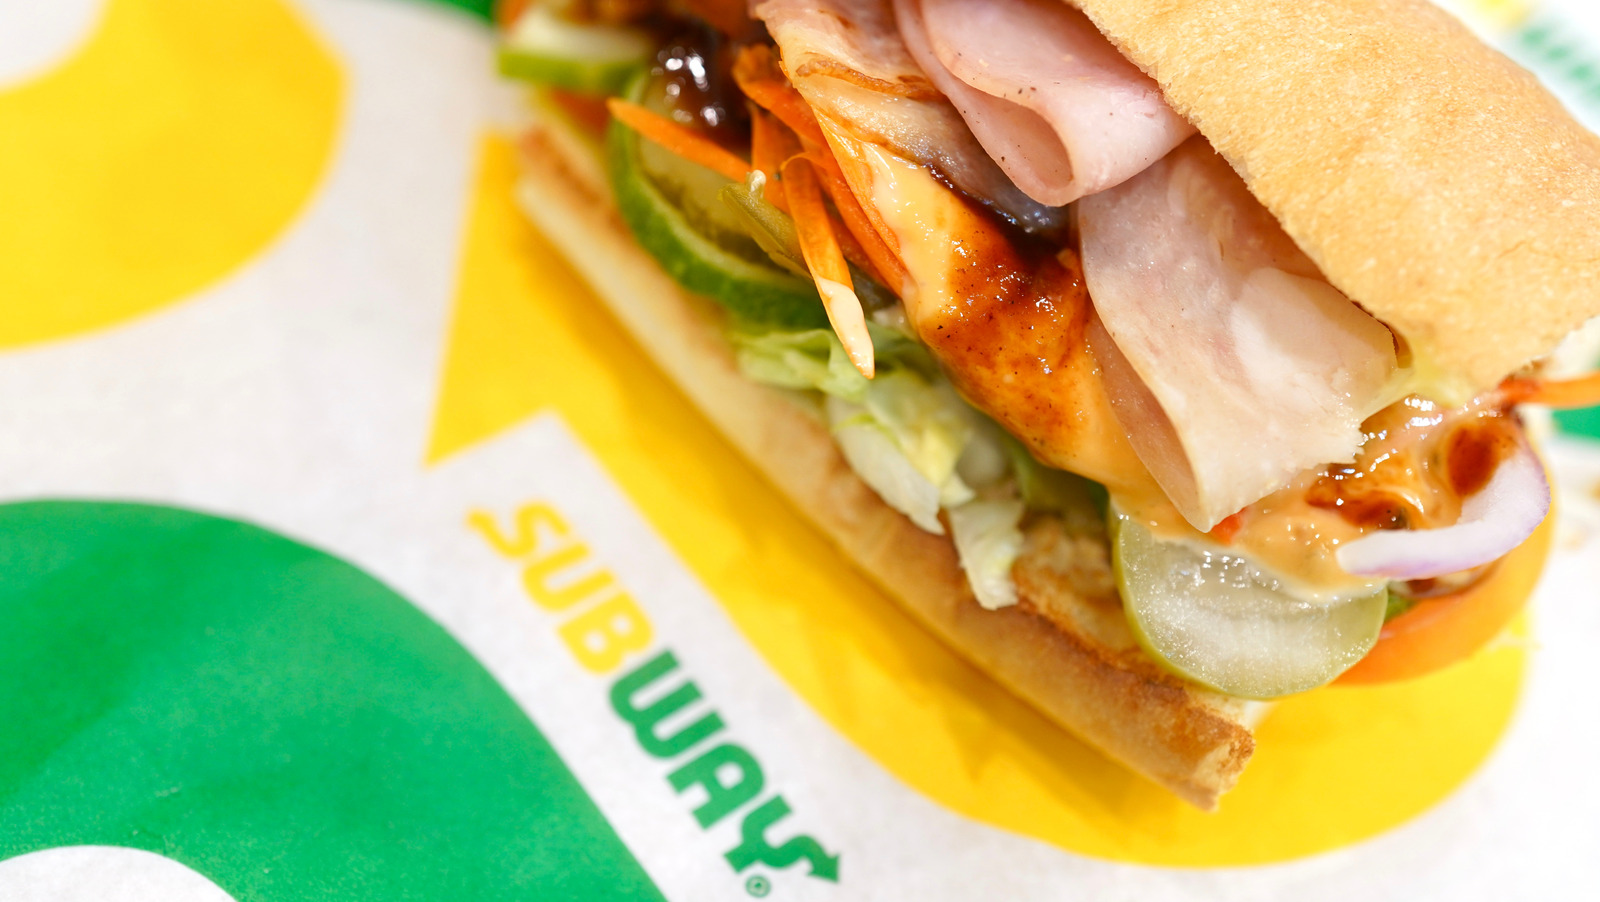 Subway Just Announced These Massive Menu Changes